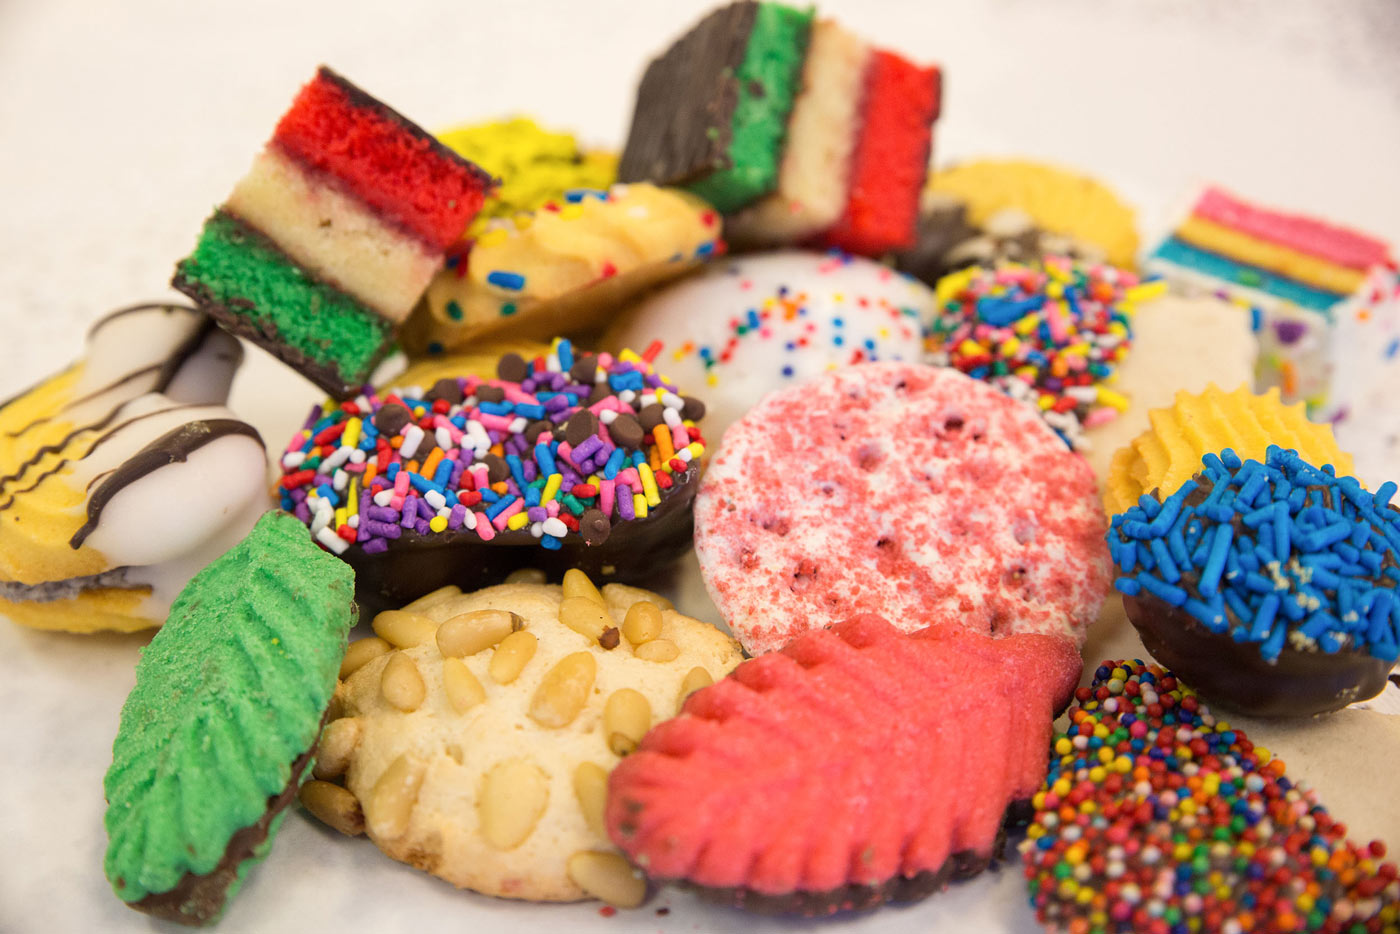 Best NJ Cookies, Howell NJ, Asbury Park, Toms River NJ, The Best Cookies and Bakery in New Jersey